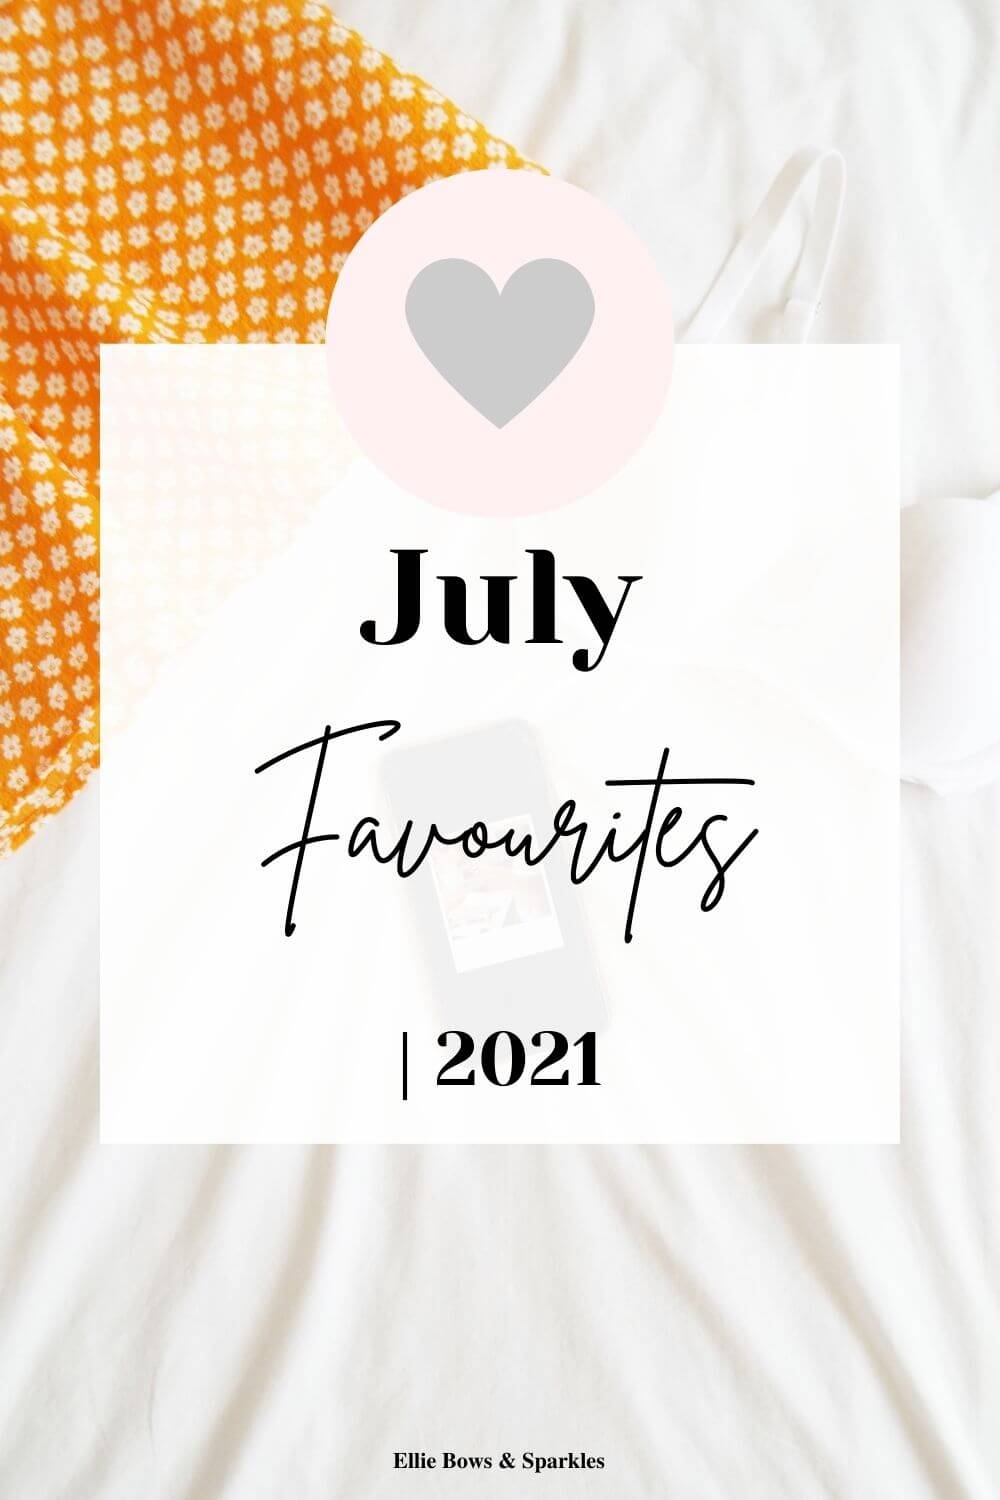 Pinterest pin with July favourites flatlay picture to background and white title card, with text reading "July Favourites 2021", with a pink circle and grey heart detail to top.